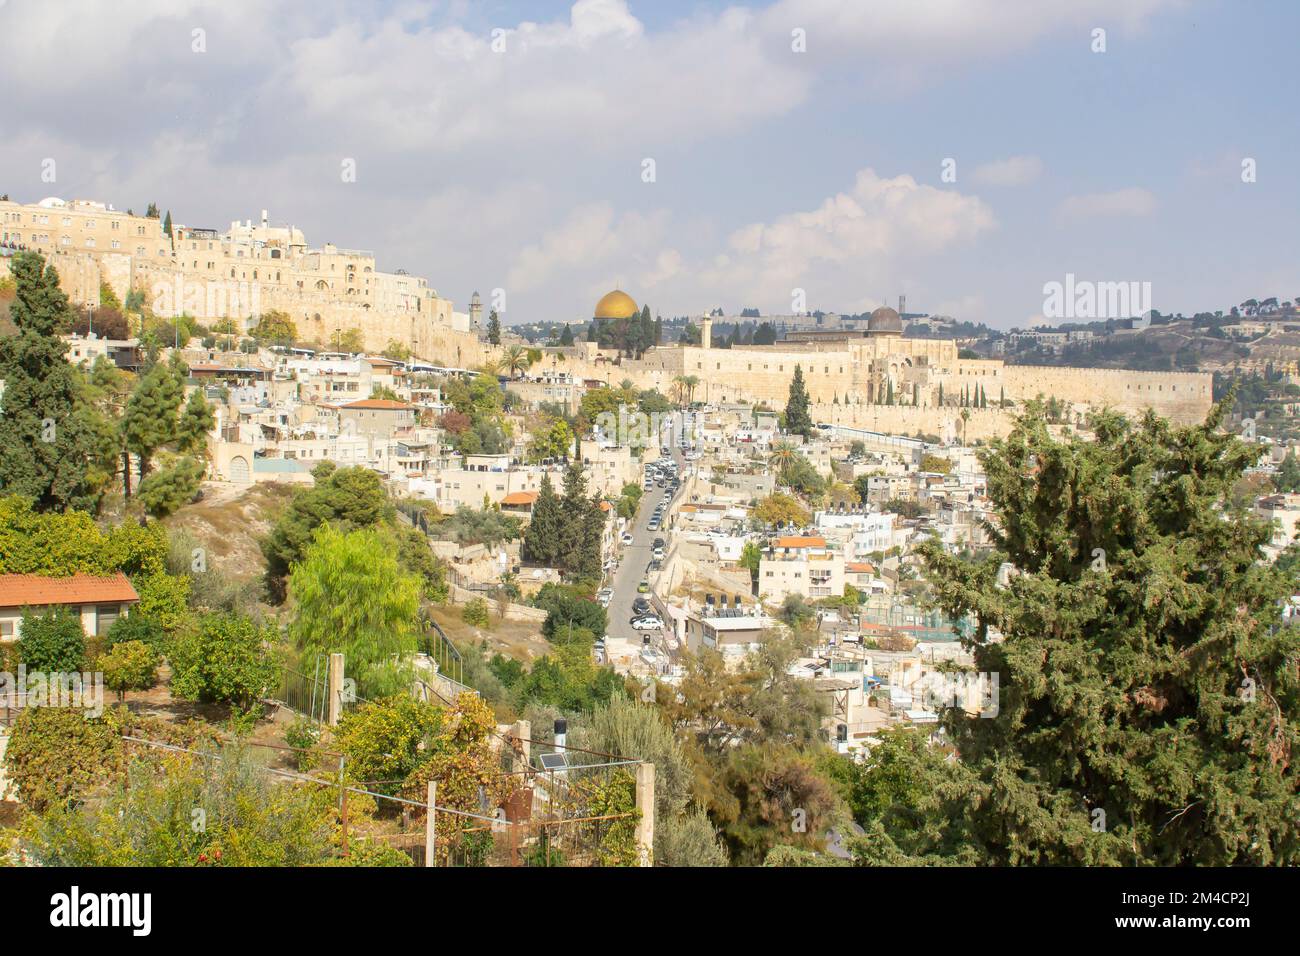 10 Nov 2022 A view of The Dome of the Rock within the ancient walled city of Jerusalem taken across the rooftops from The church of St Peter built on Stock Photo